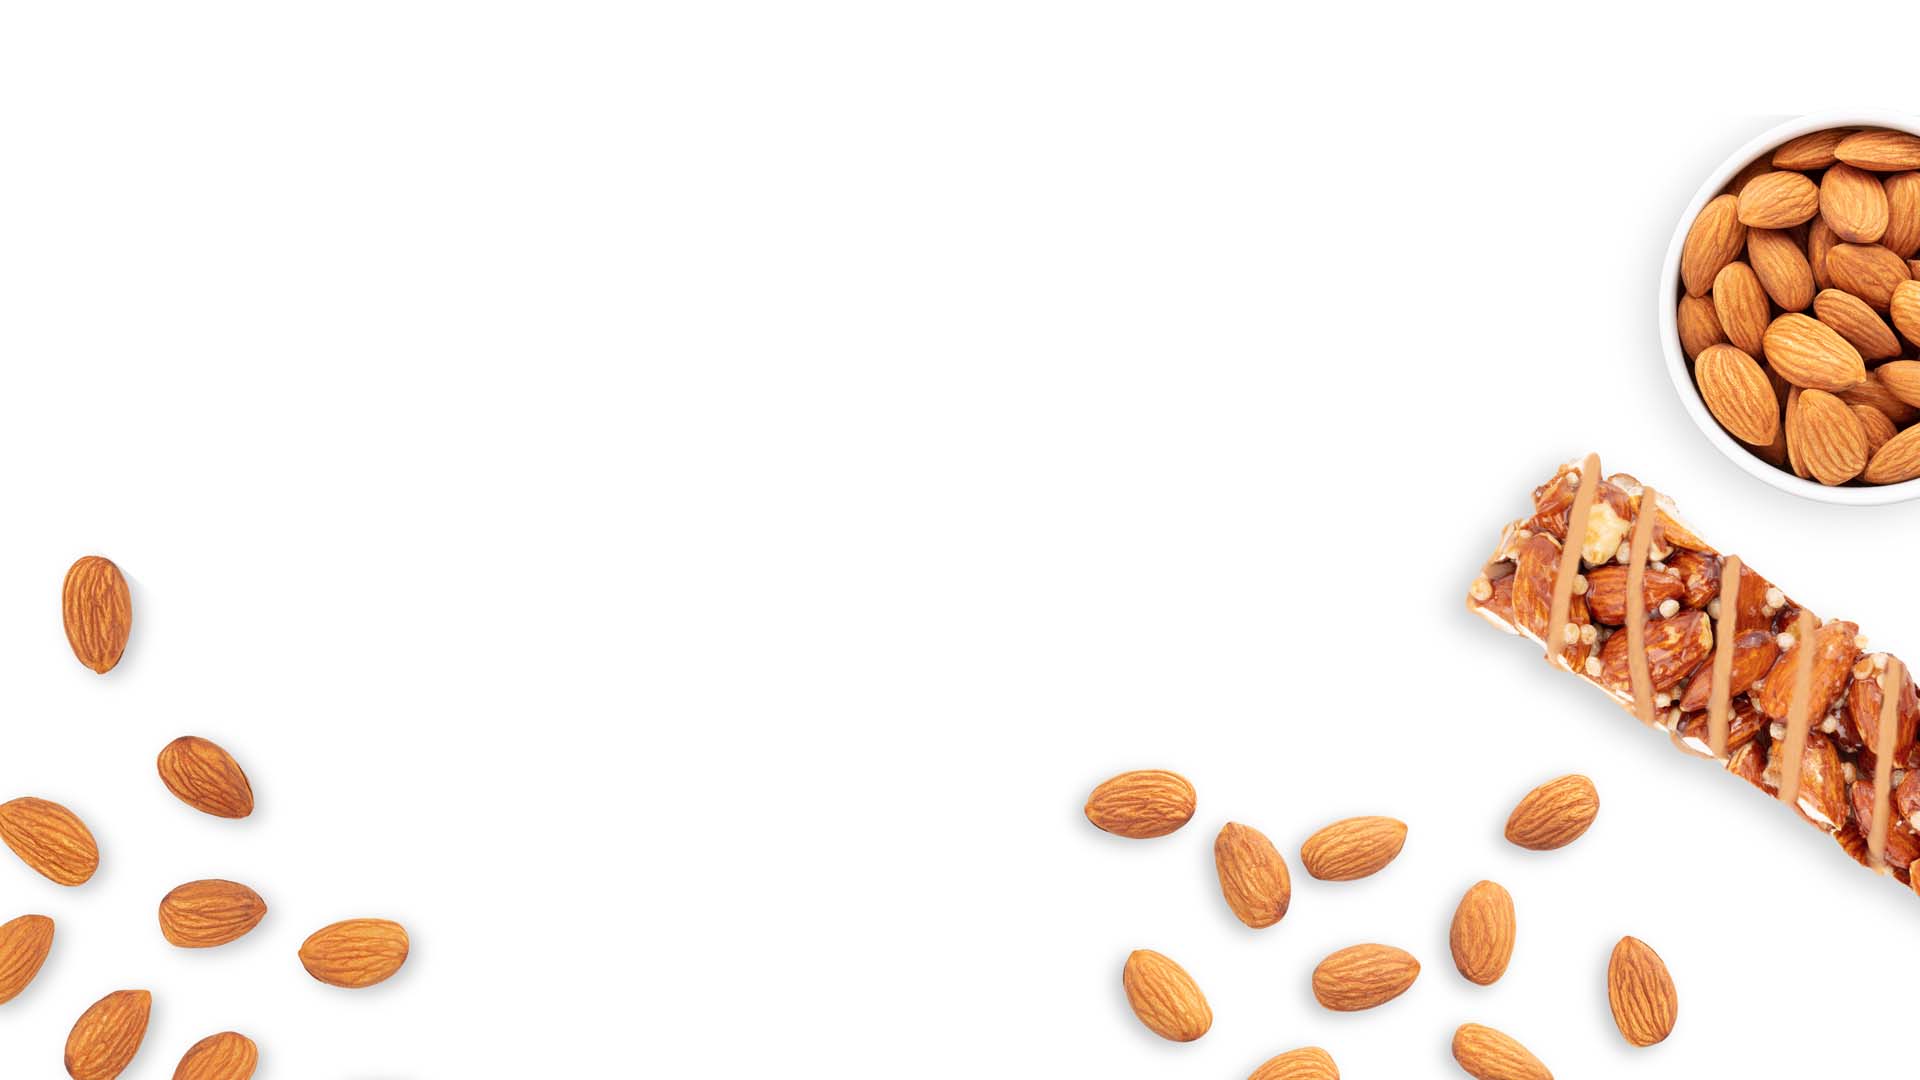 Bowl of Whole Almonds with a Nutritional Almond Snack Bar and Loose Whole Almonds - Treehouse California Almonds